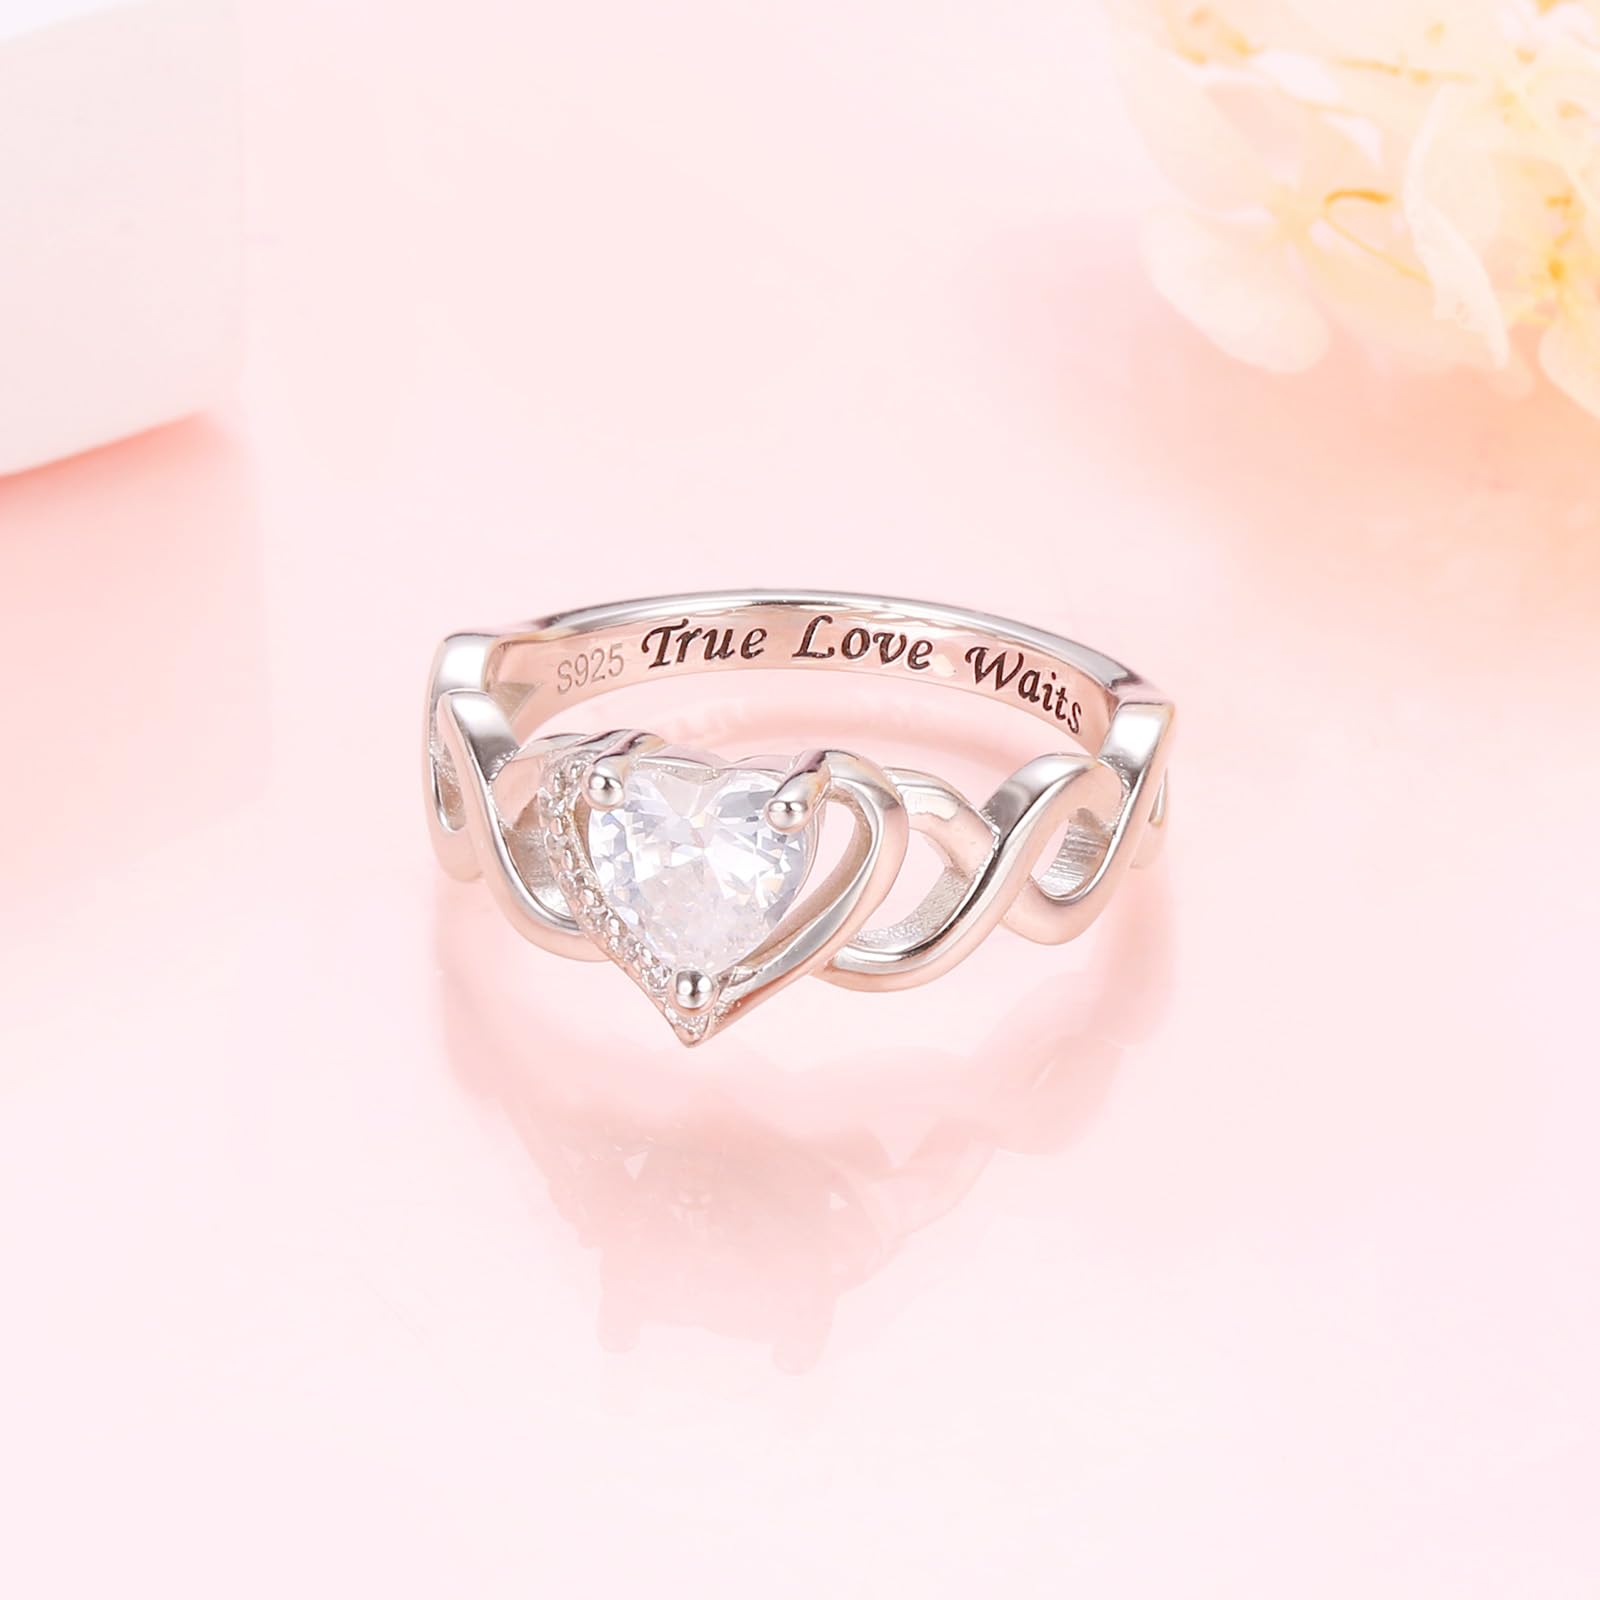 HOOHWE S925 Sterling Silver True Love Waits Ring for Women Heart Engagement Love Knot Ring Promise Ring Wedding Ring for Women Girlfriend Wife Size 7